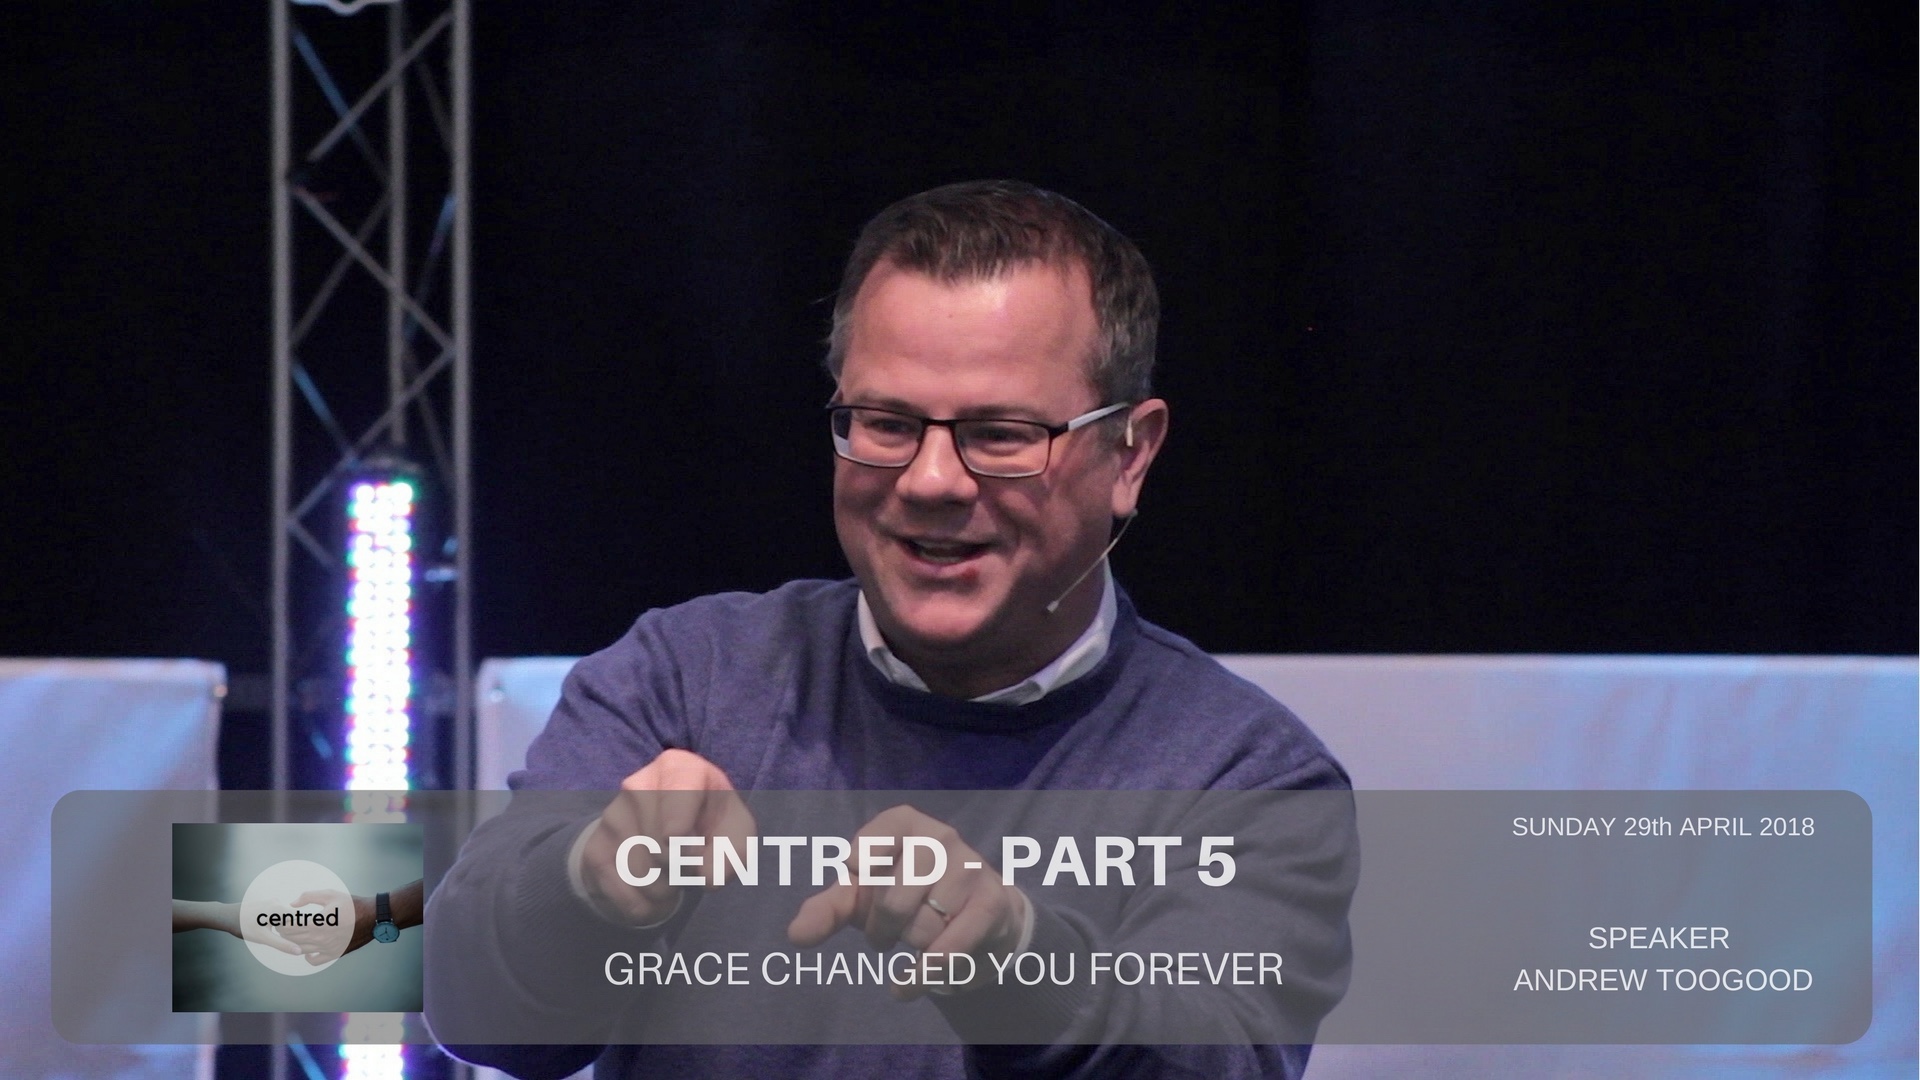 Centred Part 5 - Grace changed you forever